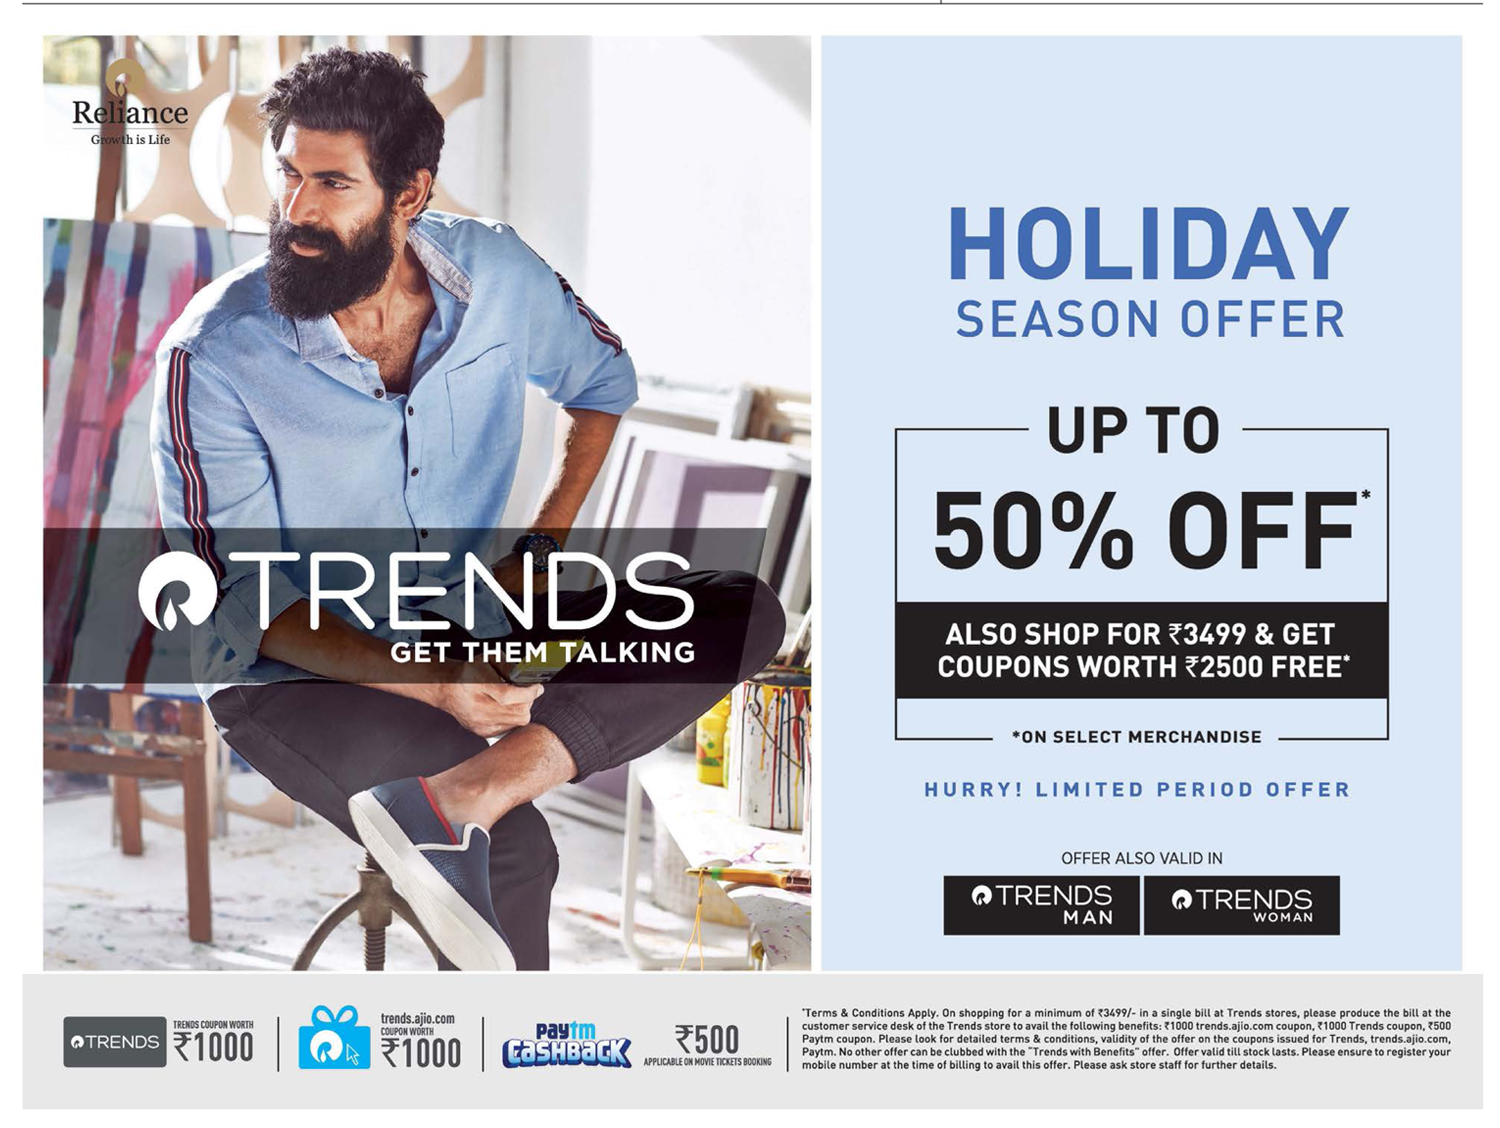 reliance-trends-holiday-season-offer-upto-50%-off-ad-deccan-chronicle-hyderabad-02-03-2019.png